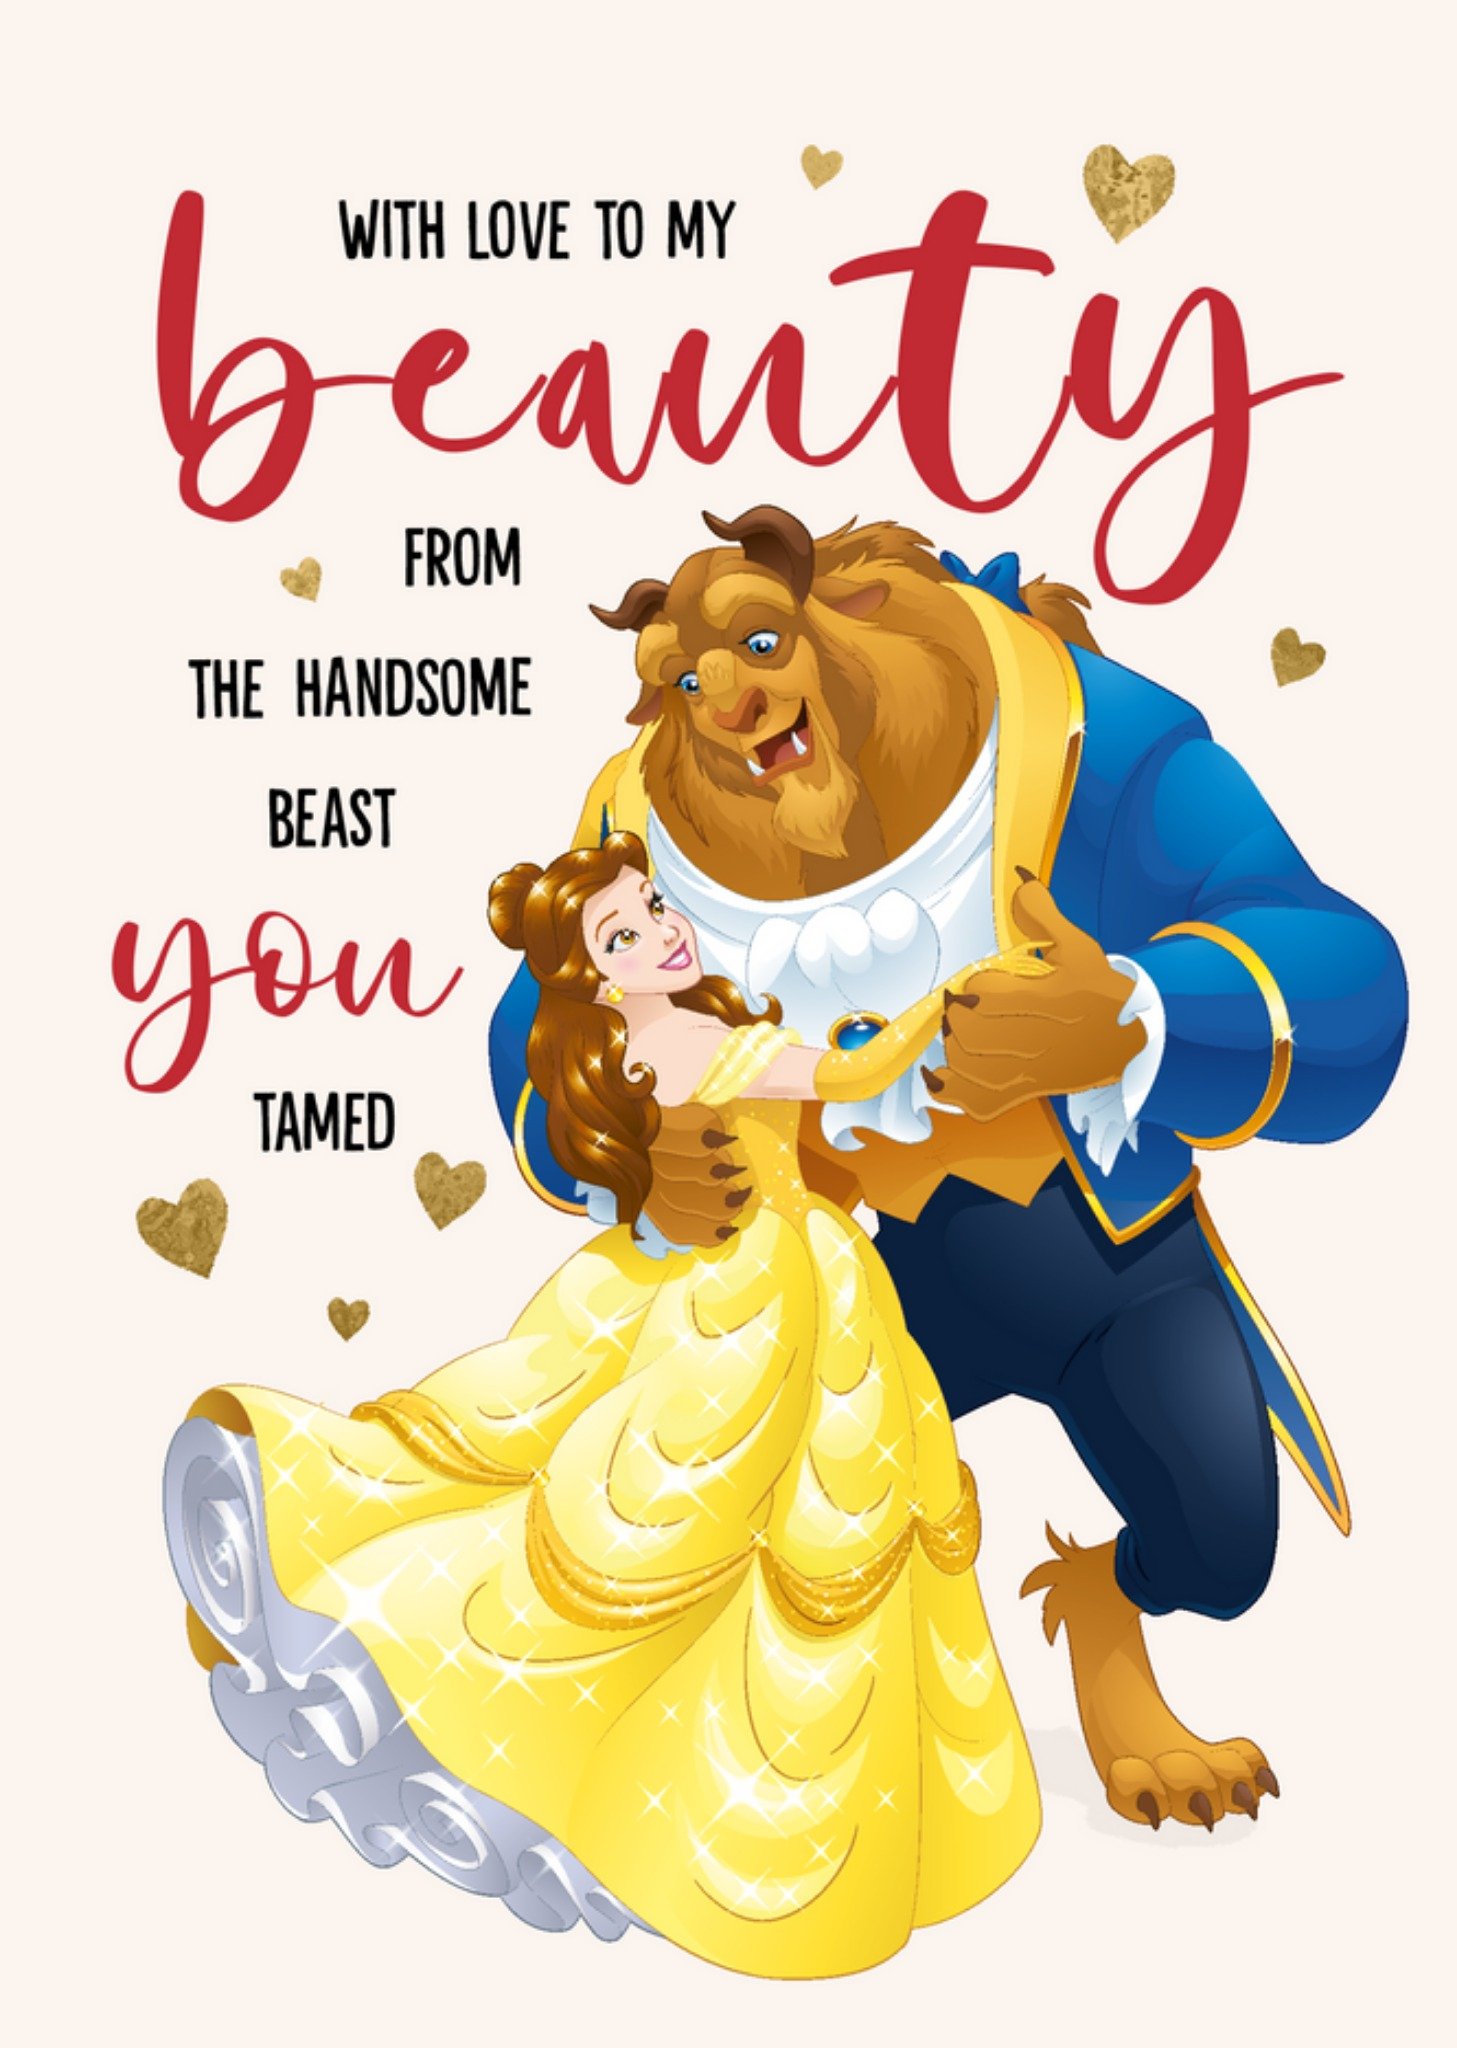 Disney Beauty And The Beast With Love To My Beauty Card Ecard